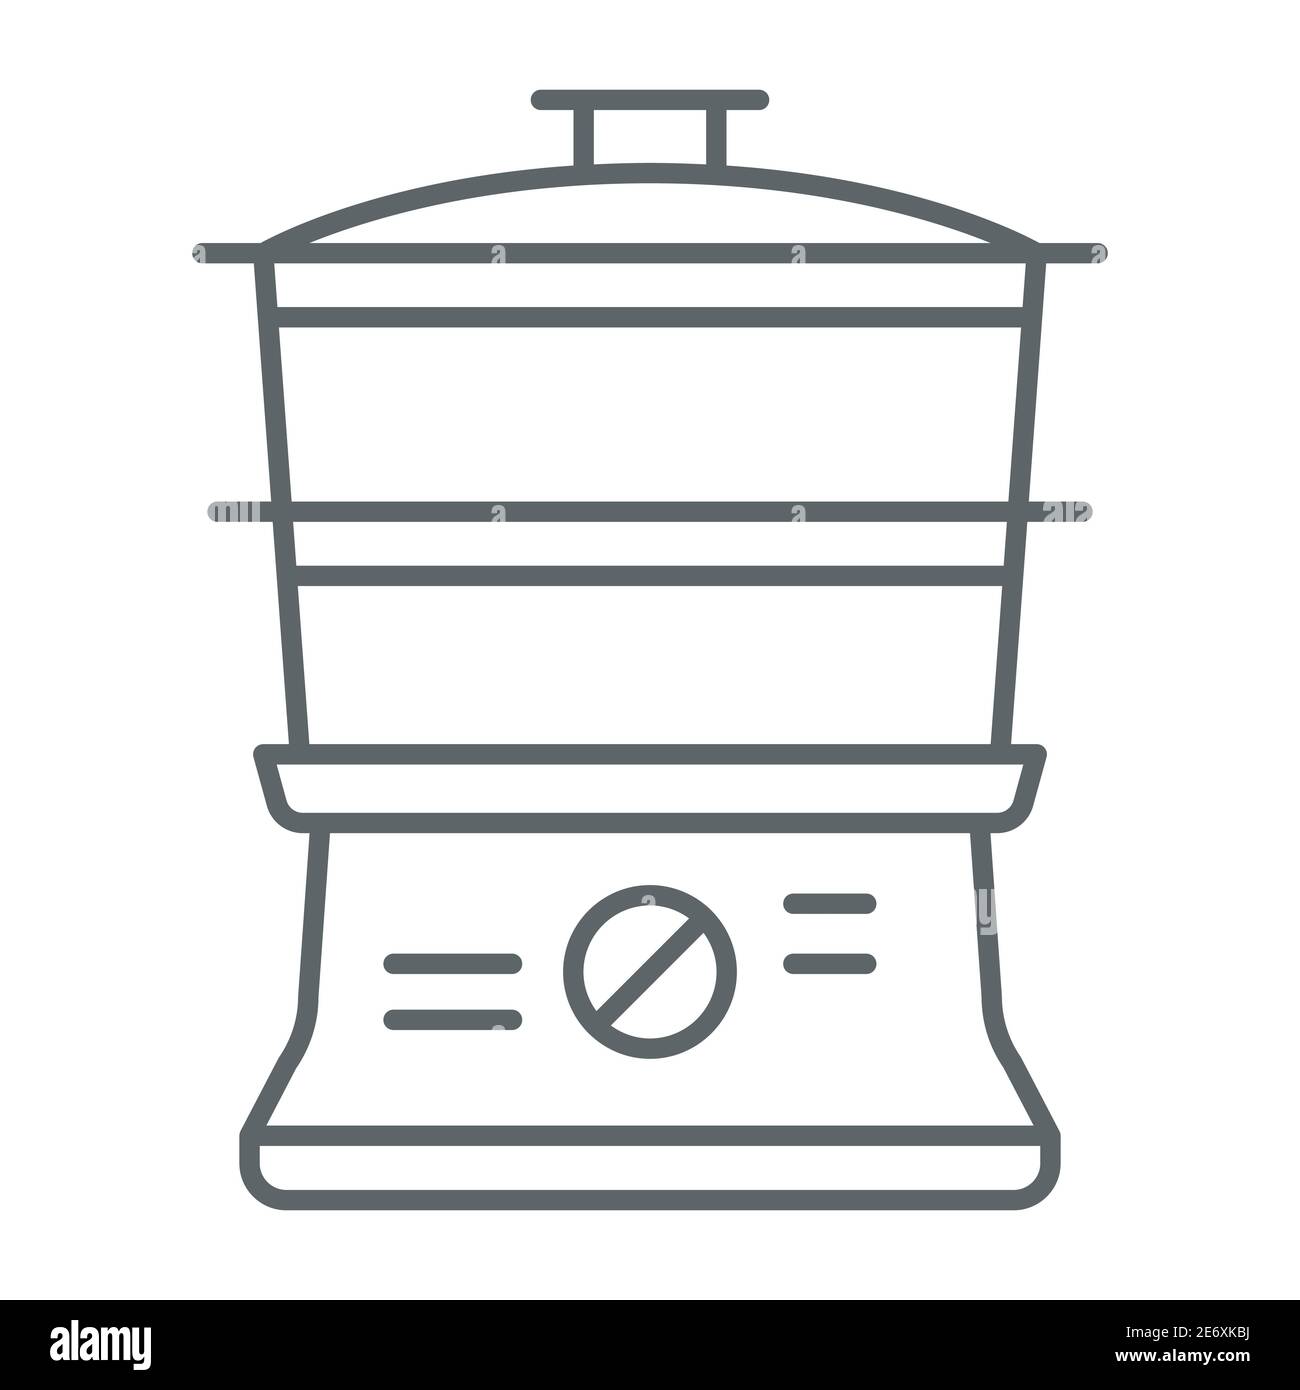 Double Boiler Vector Images (over 970)